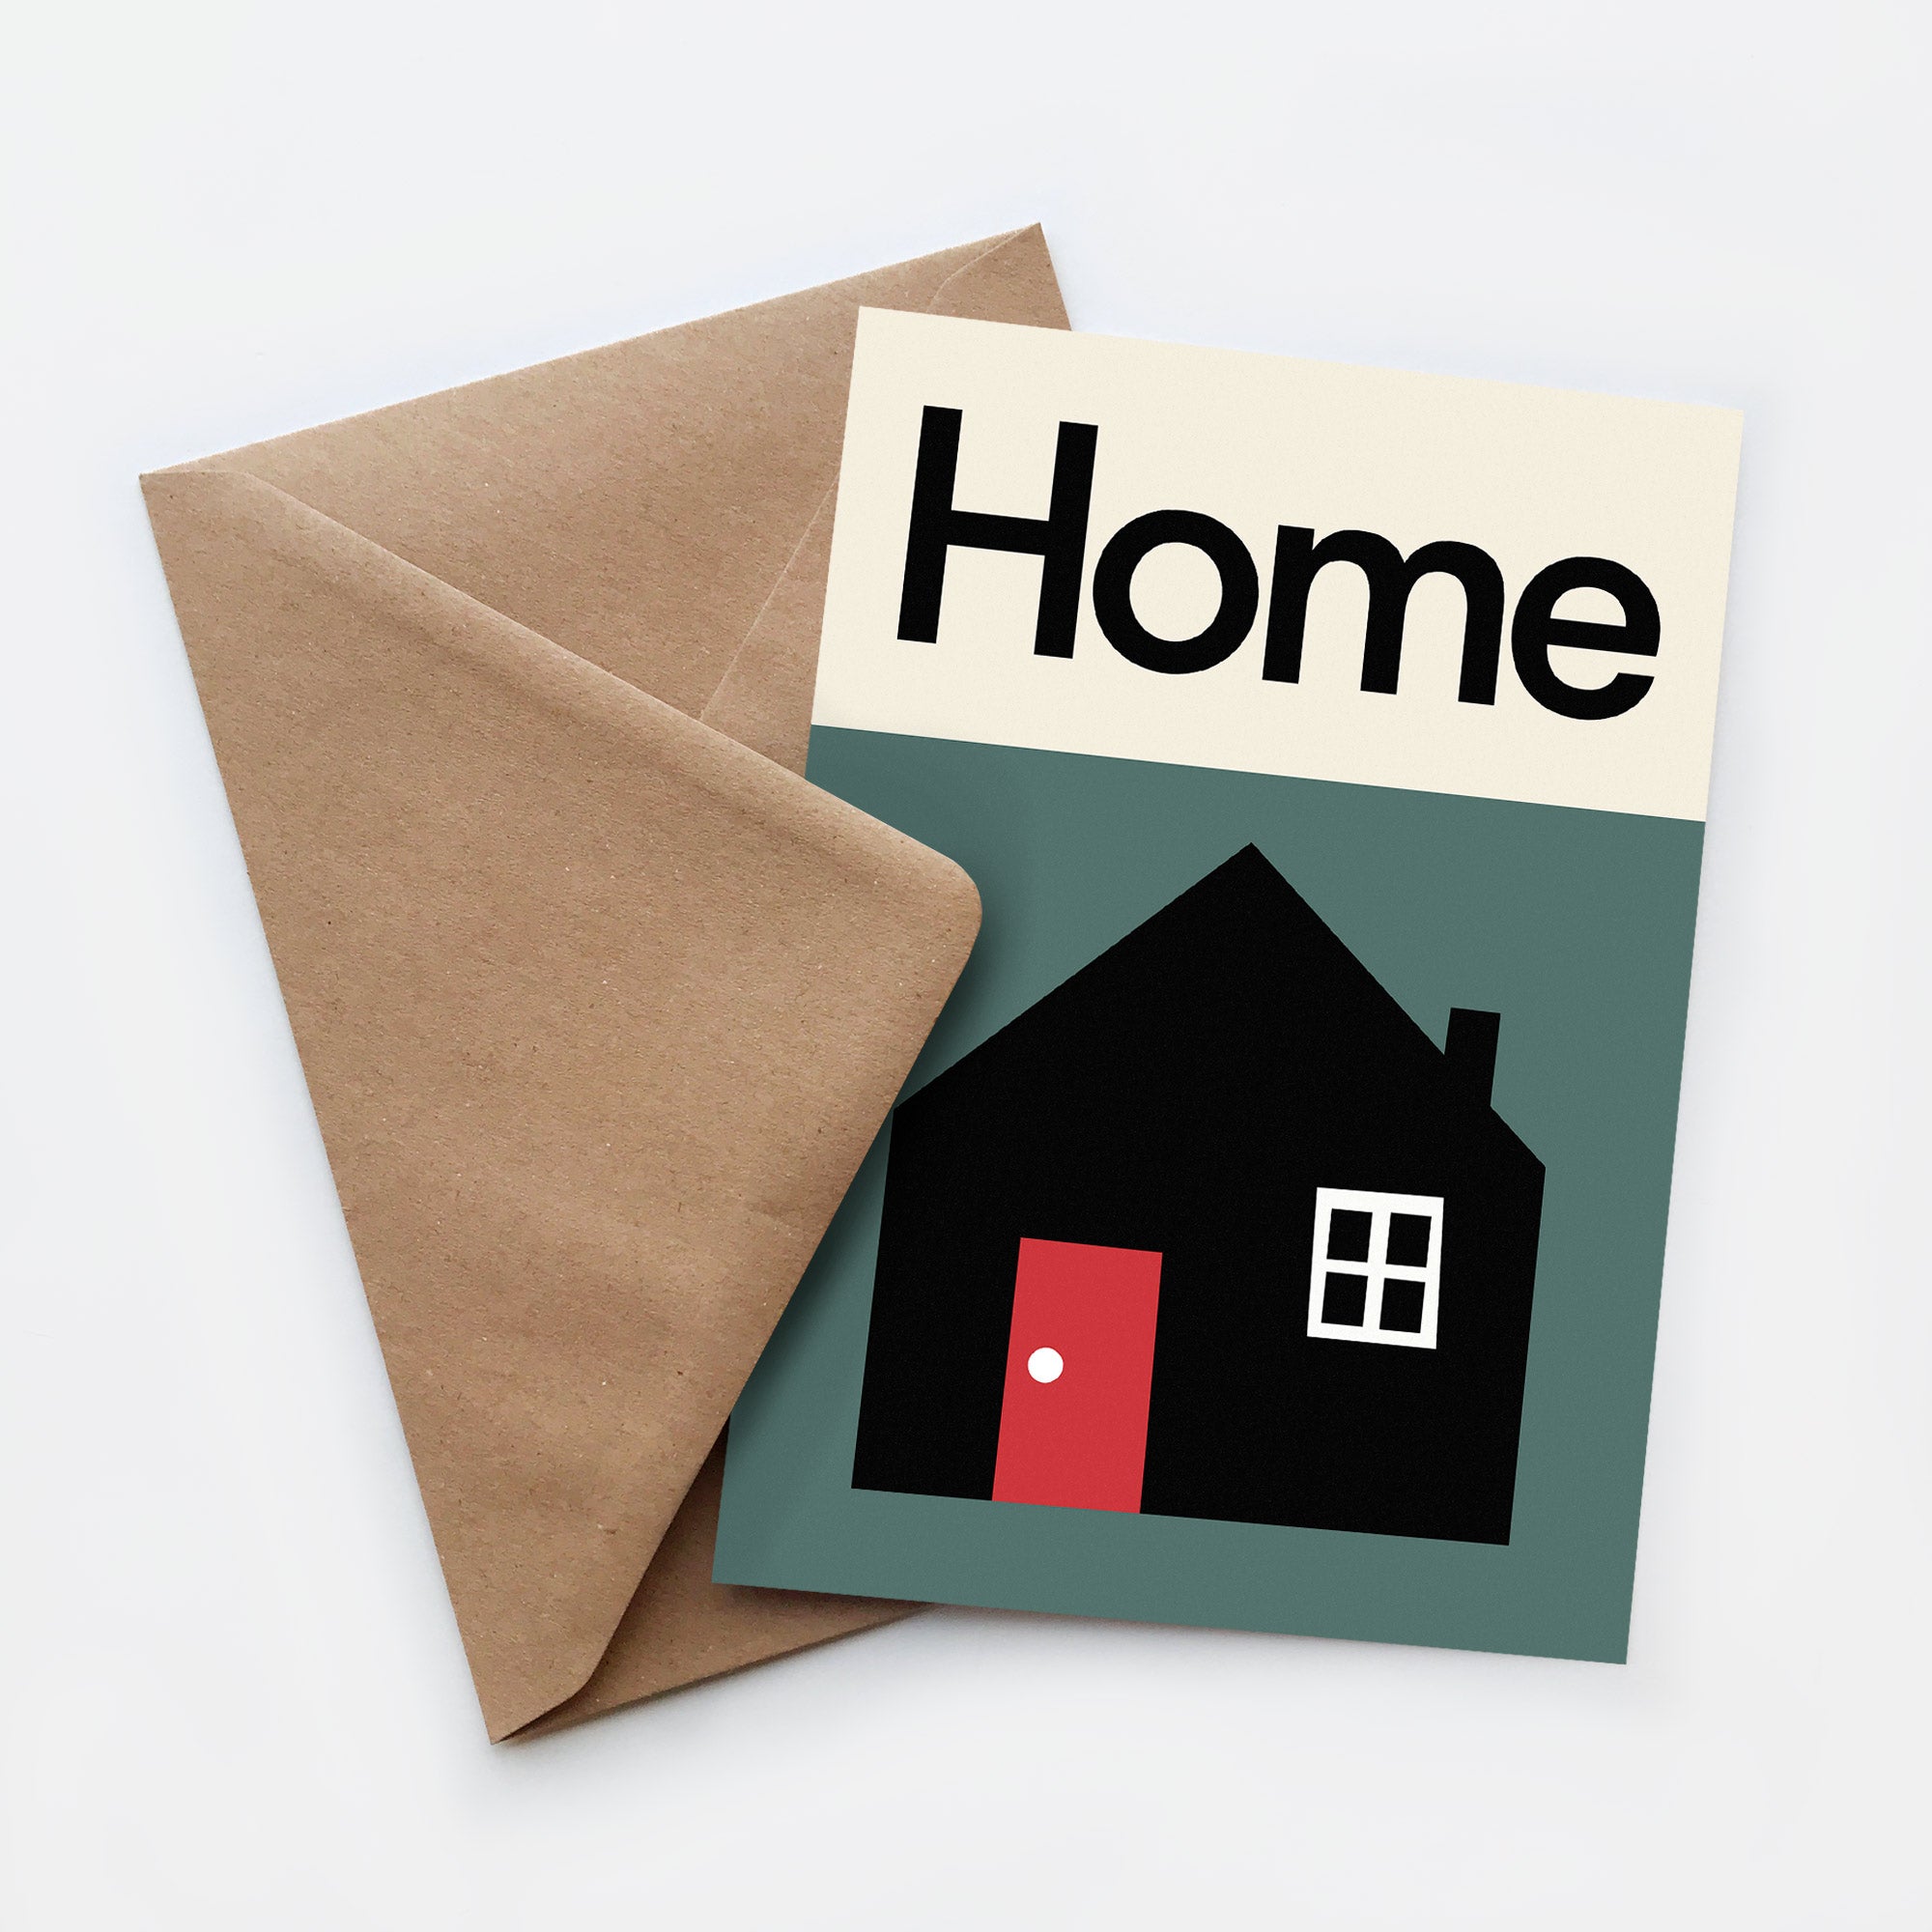 Home cards